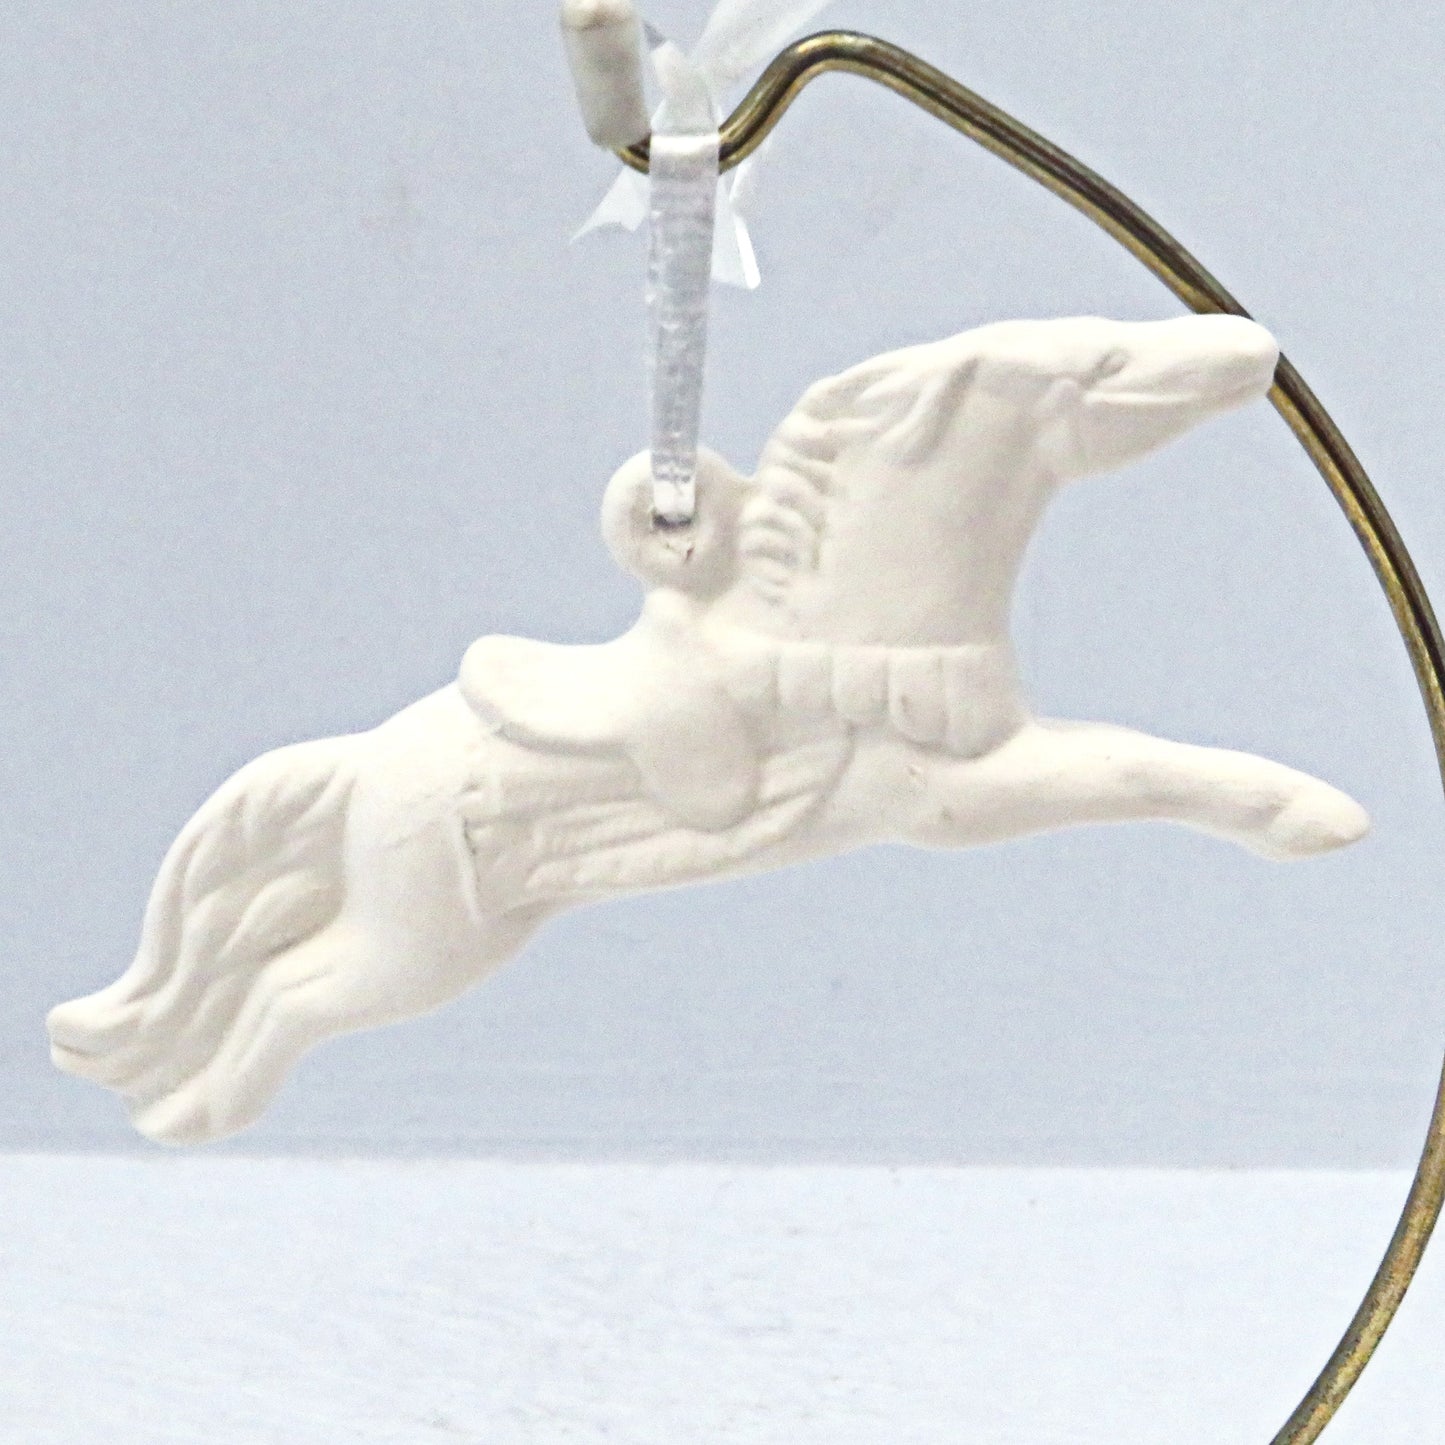 Handmade Ready to Paint Leaping Carousel Horse Ornament for Home Decor